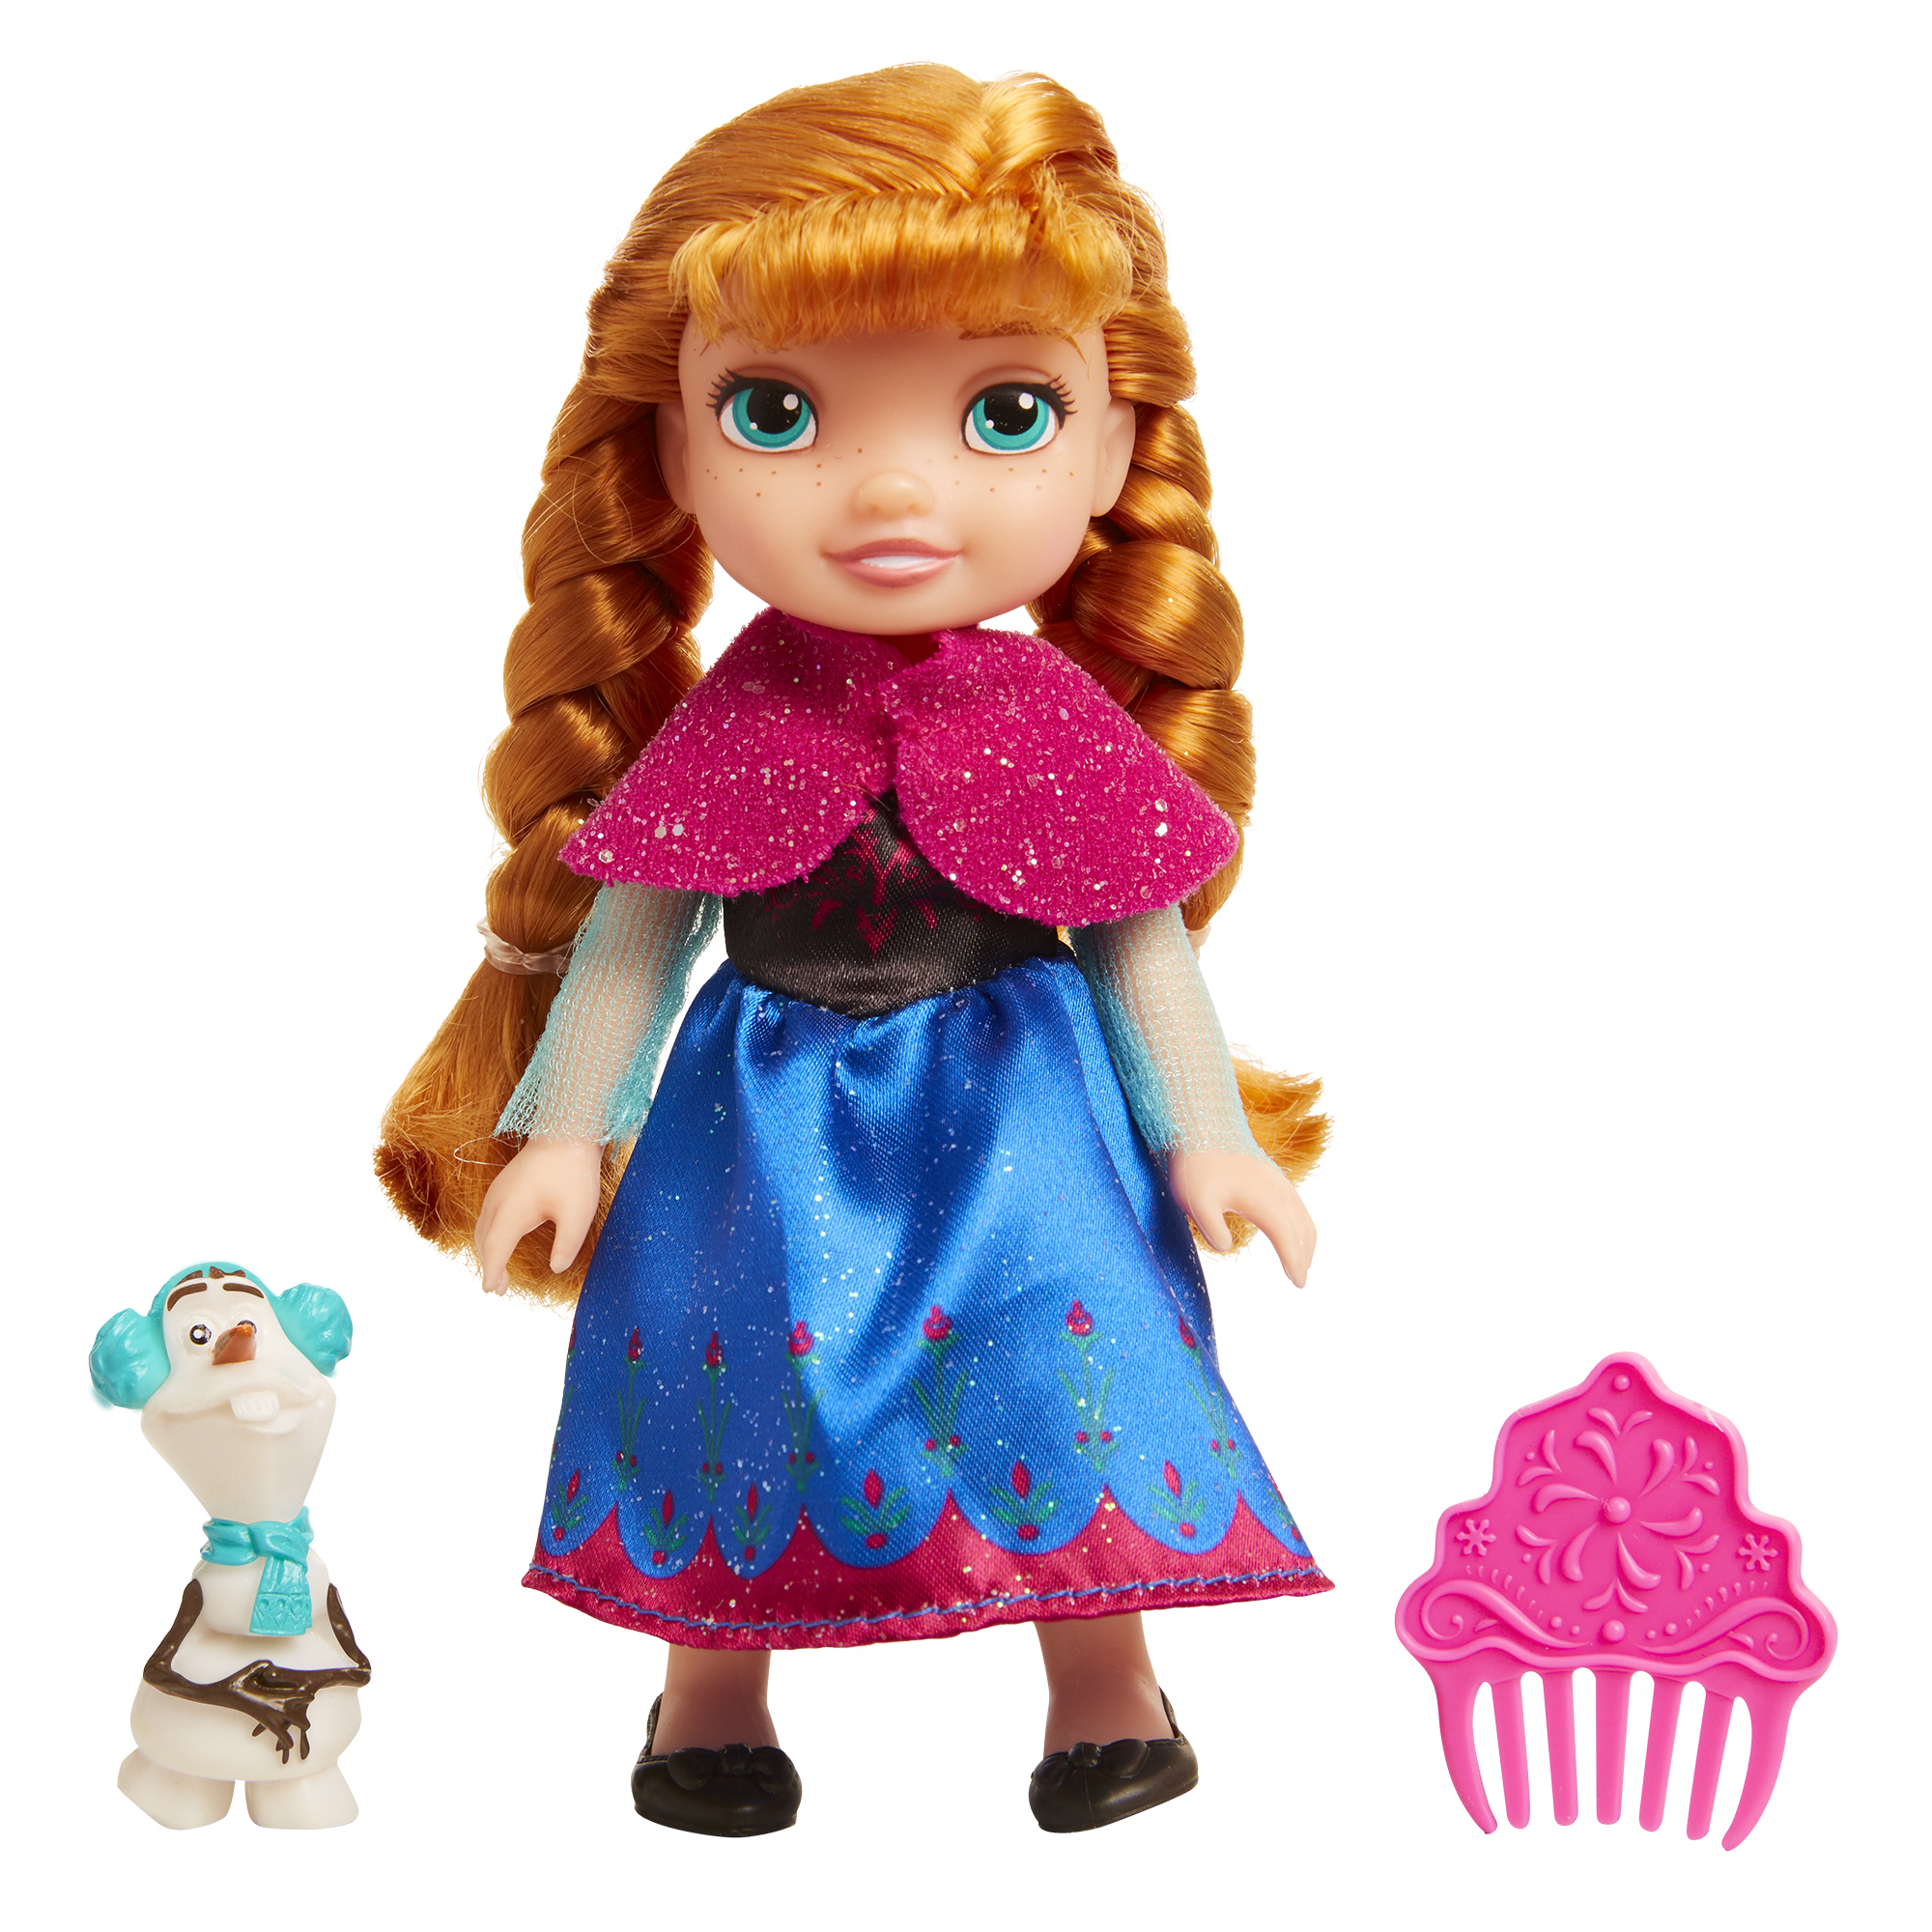 Disney Frozen Petite Anna Doll with Olaf - image 4 of 6